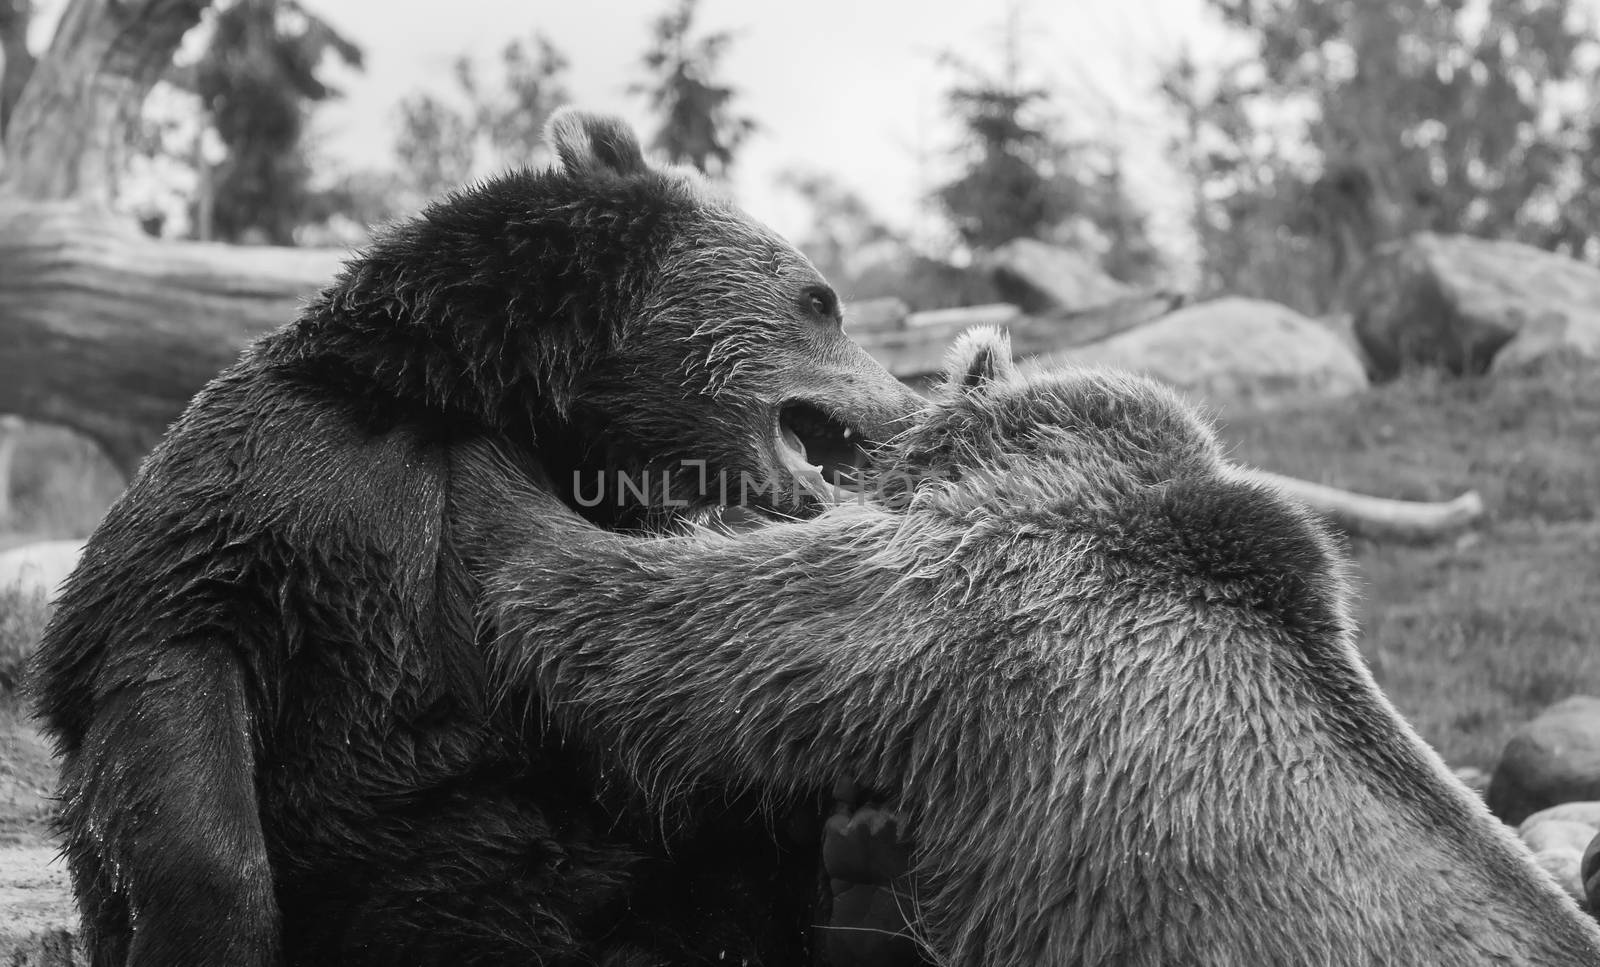 Two Grizzly (Brown) Bears Fighting and playing